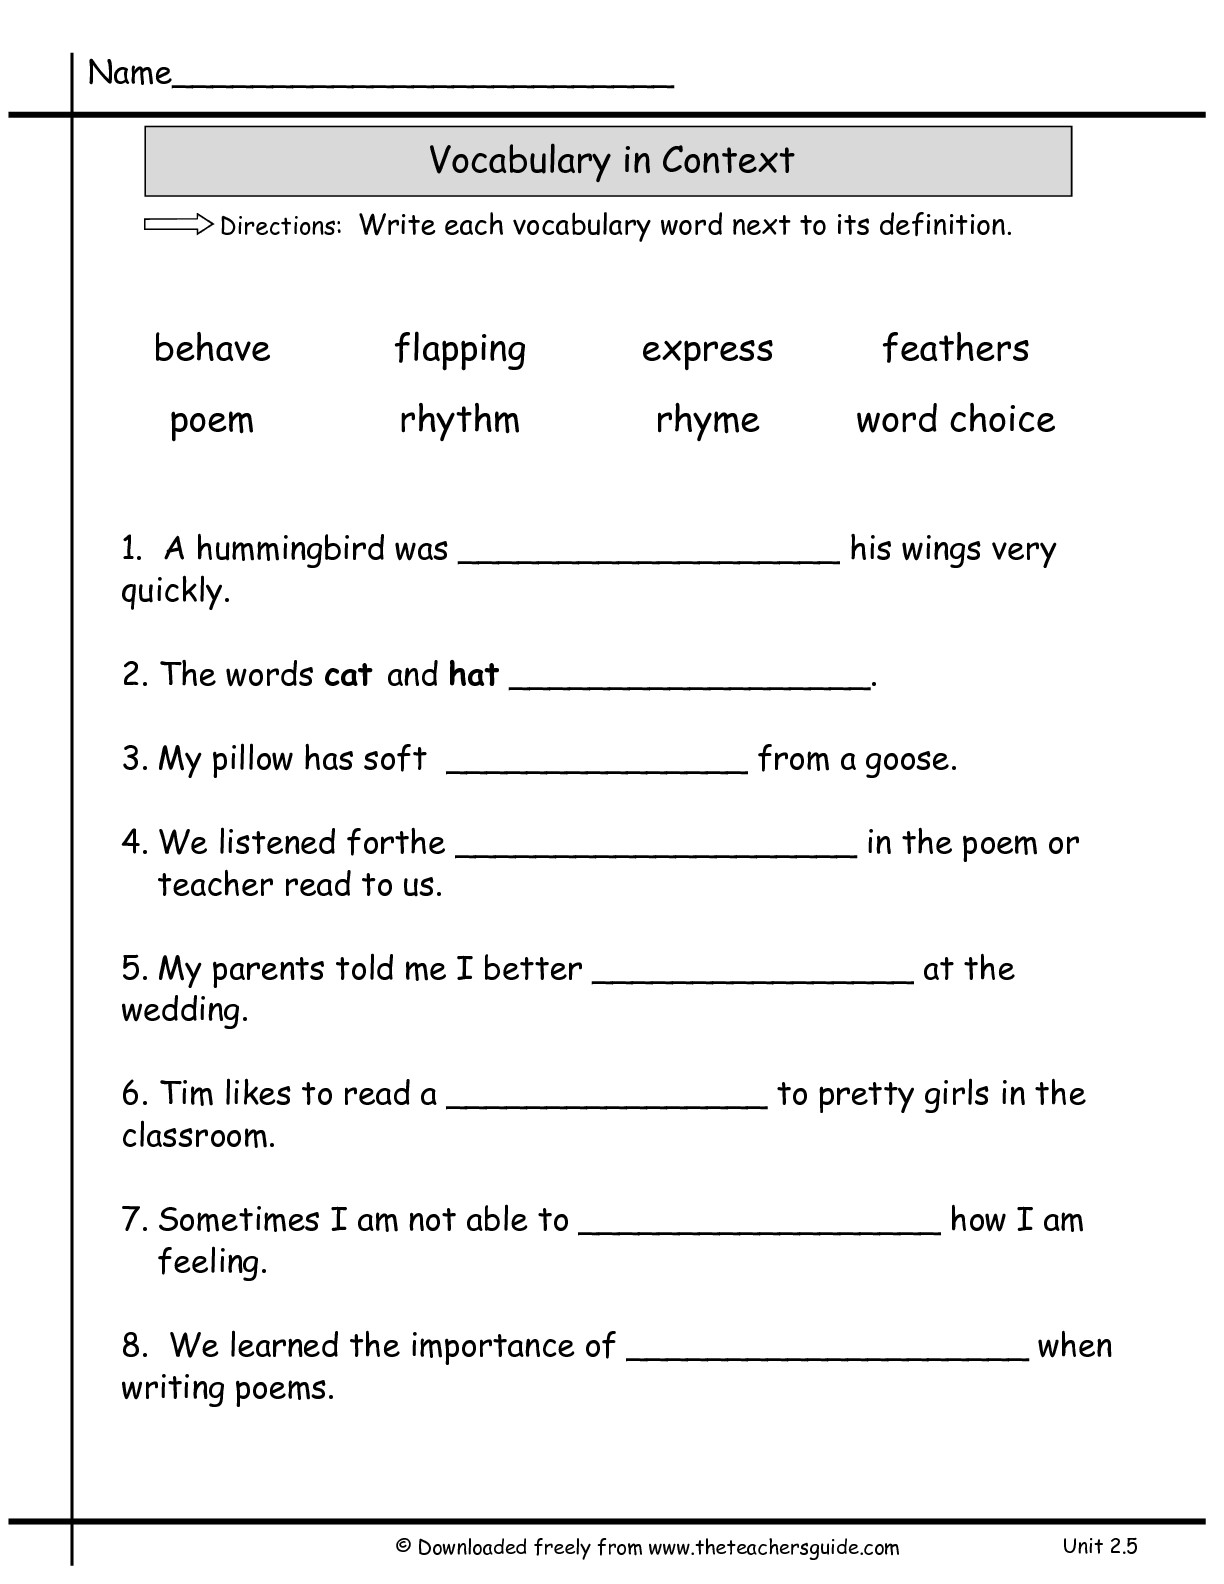 13 Best Images of Vocabulary Practice Worksheets - 3rd ...